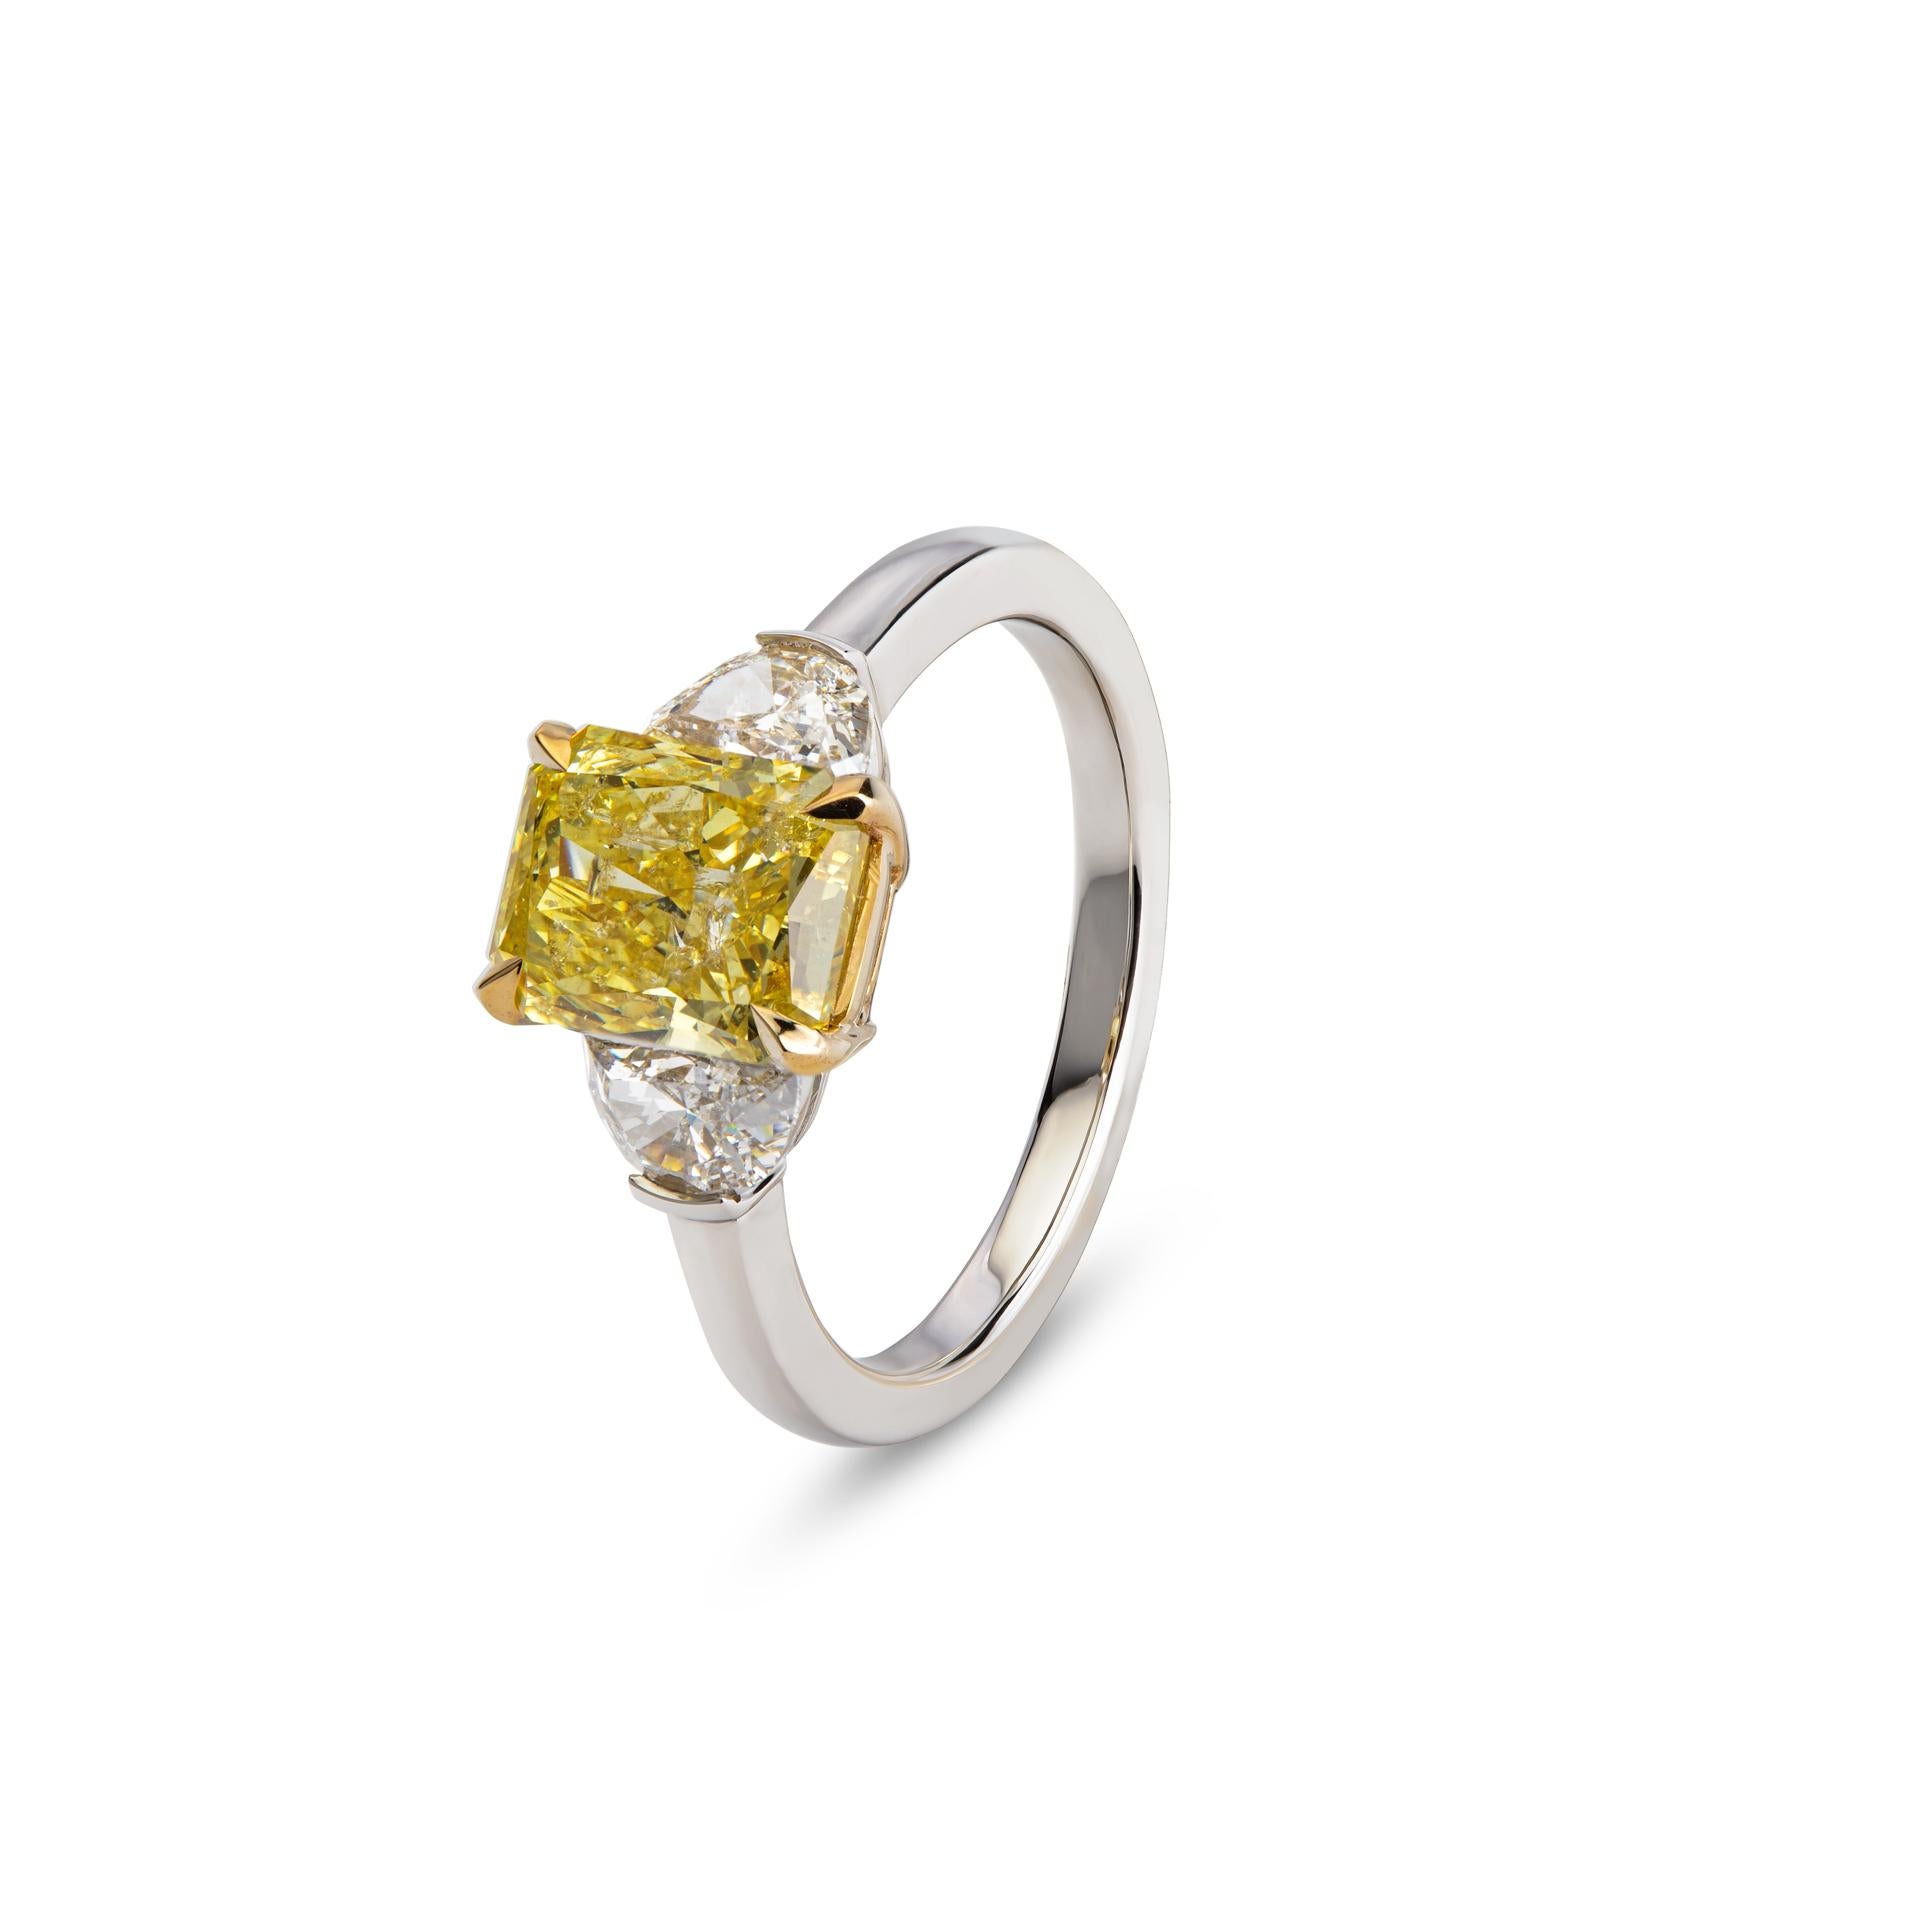 At its heart lies a captivating 2.16-carat radiant fancy intense yellow diamond, certified by GIA. The central stone, with its vibrant hue commands attention and radiates elegance. Flanking the central Diamond are two exquisite half-moon diamonds,